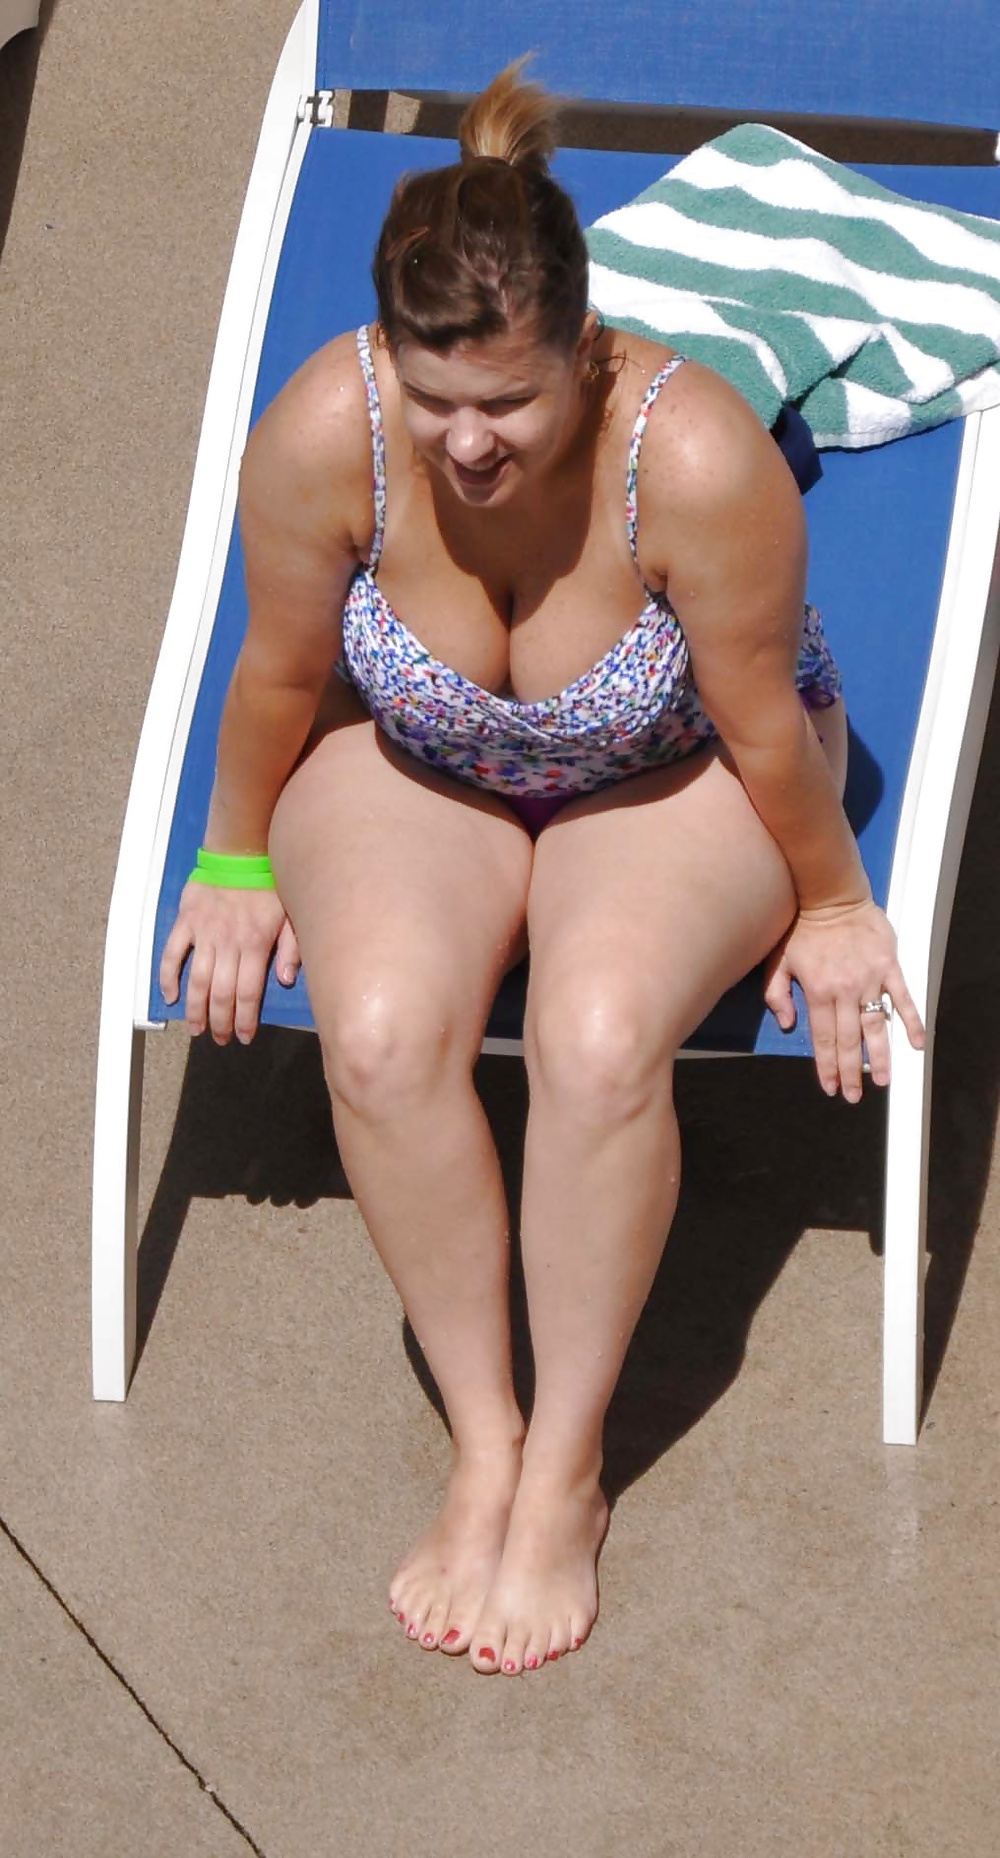 Candid MILF Mom Fat Tits Ass by Pool #39786178